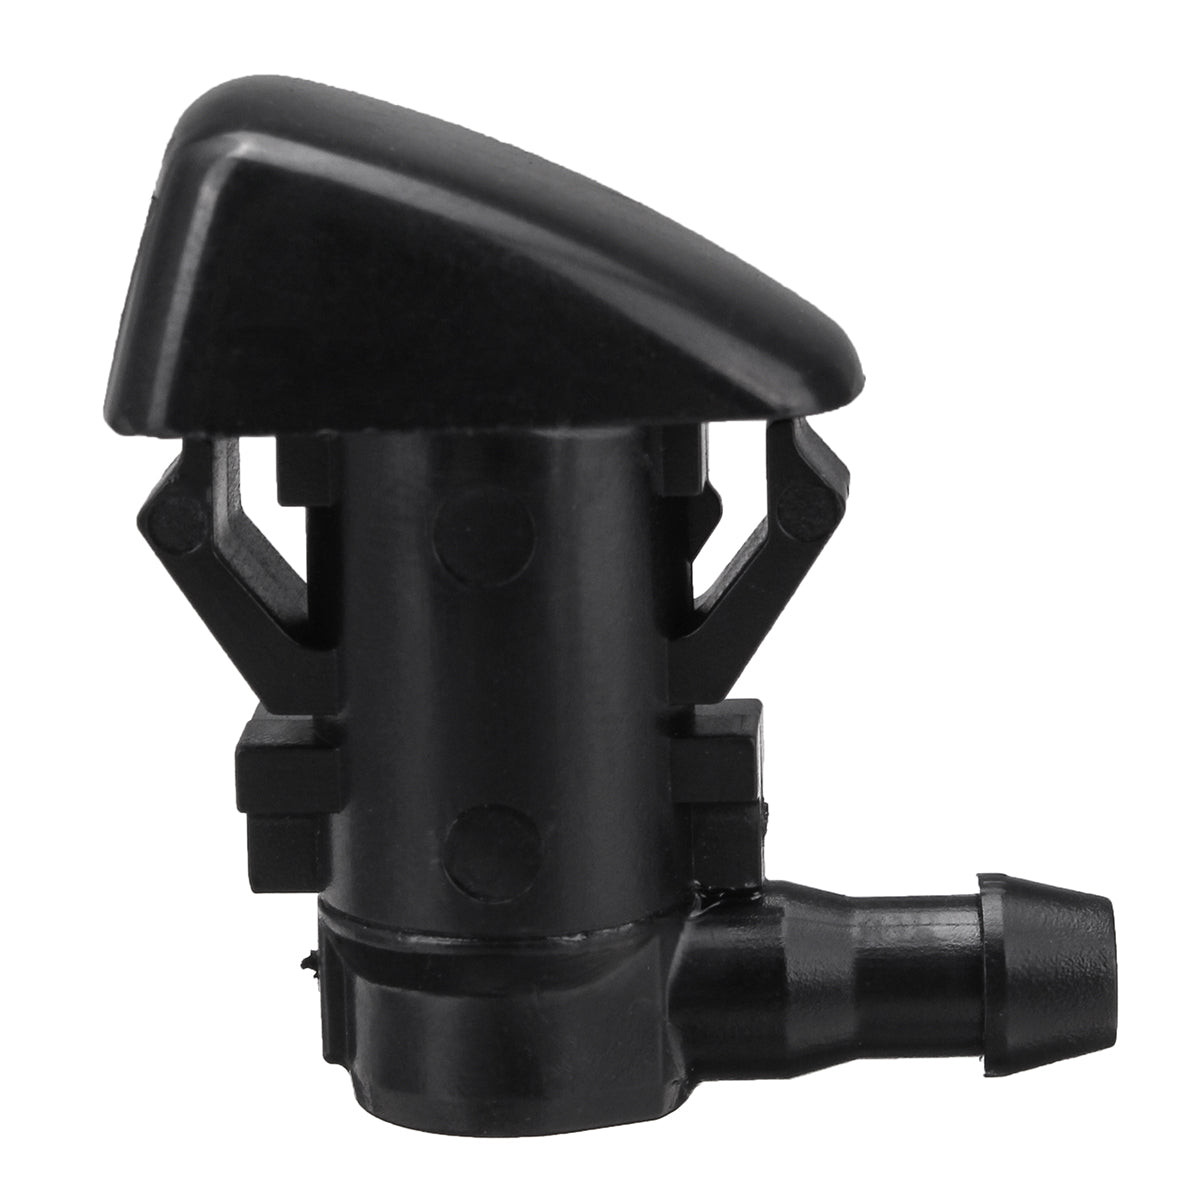 Black Windshied Wiper Washer Spray Nozzle For Jeep Grand Cherokee 2005-2018